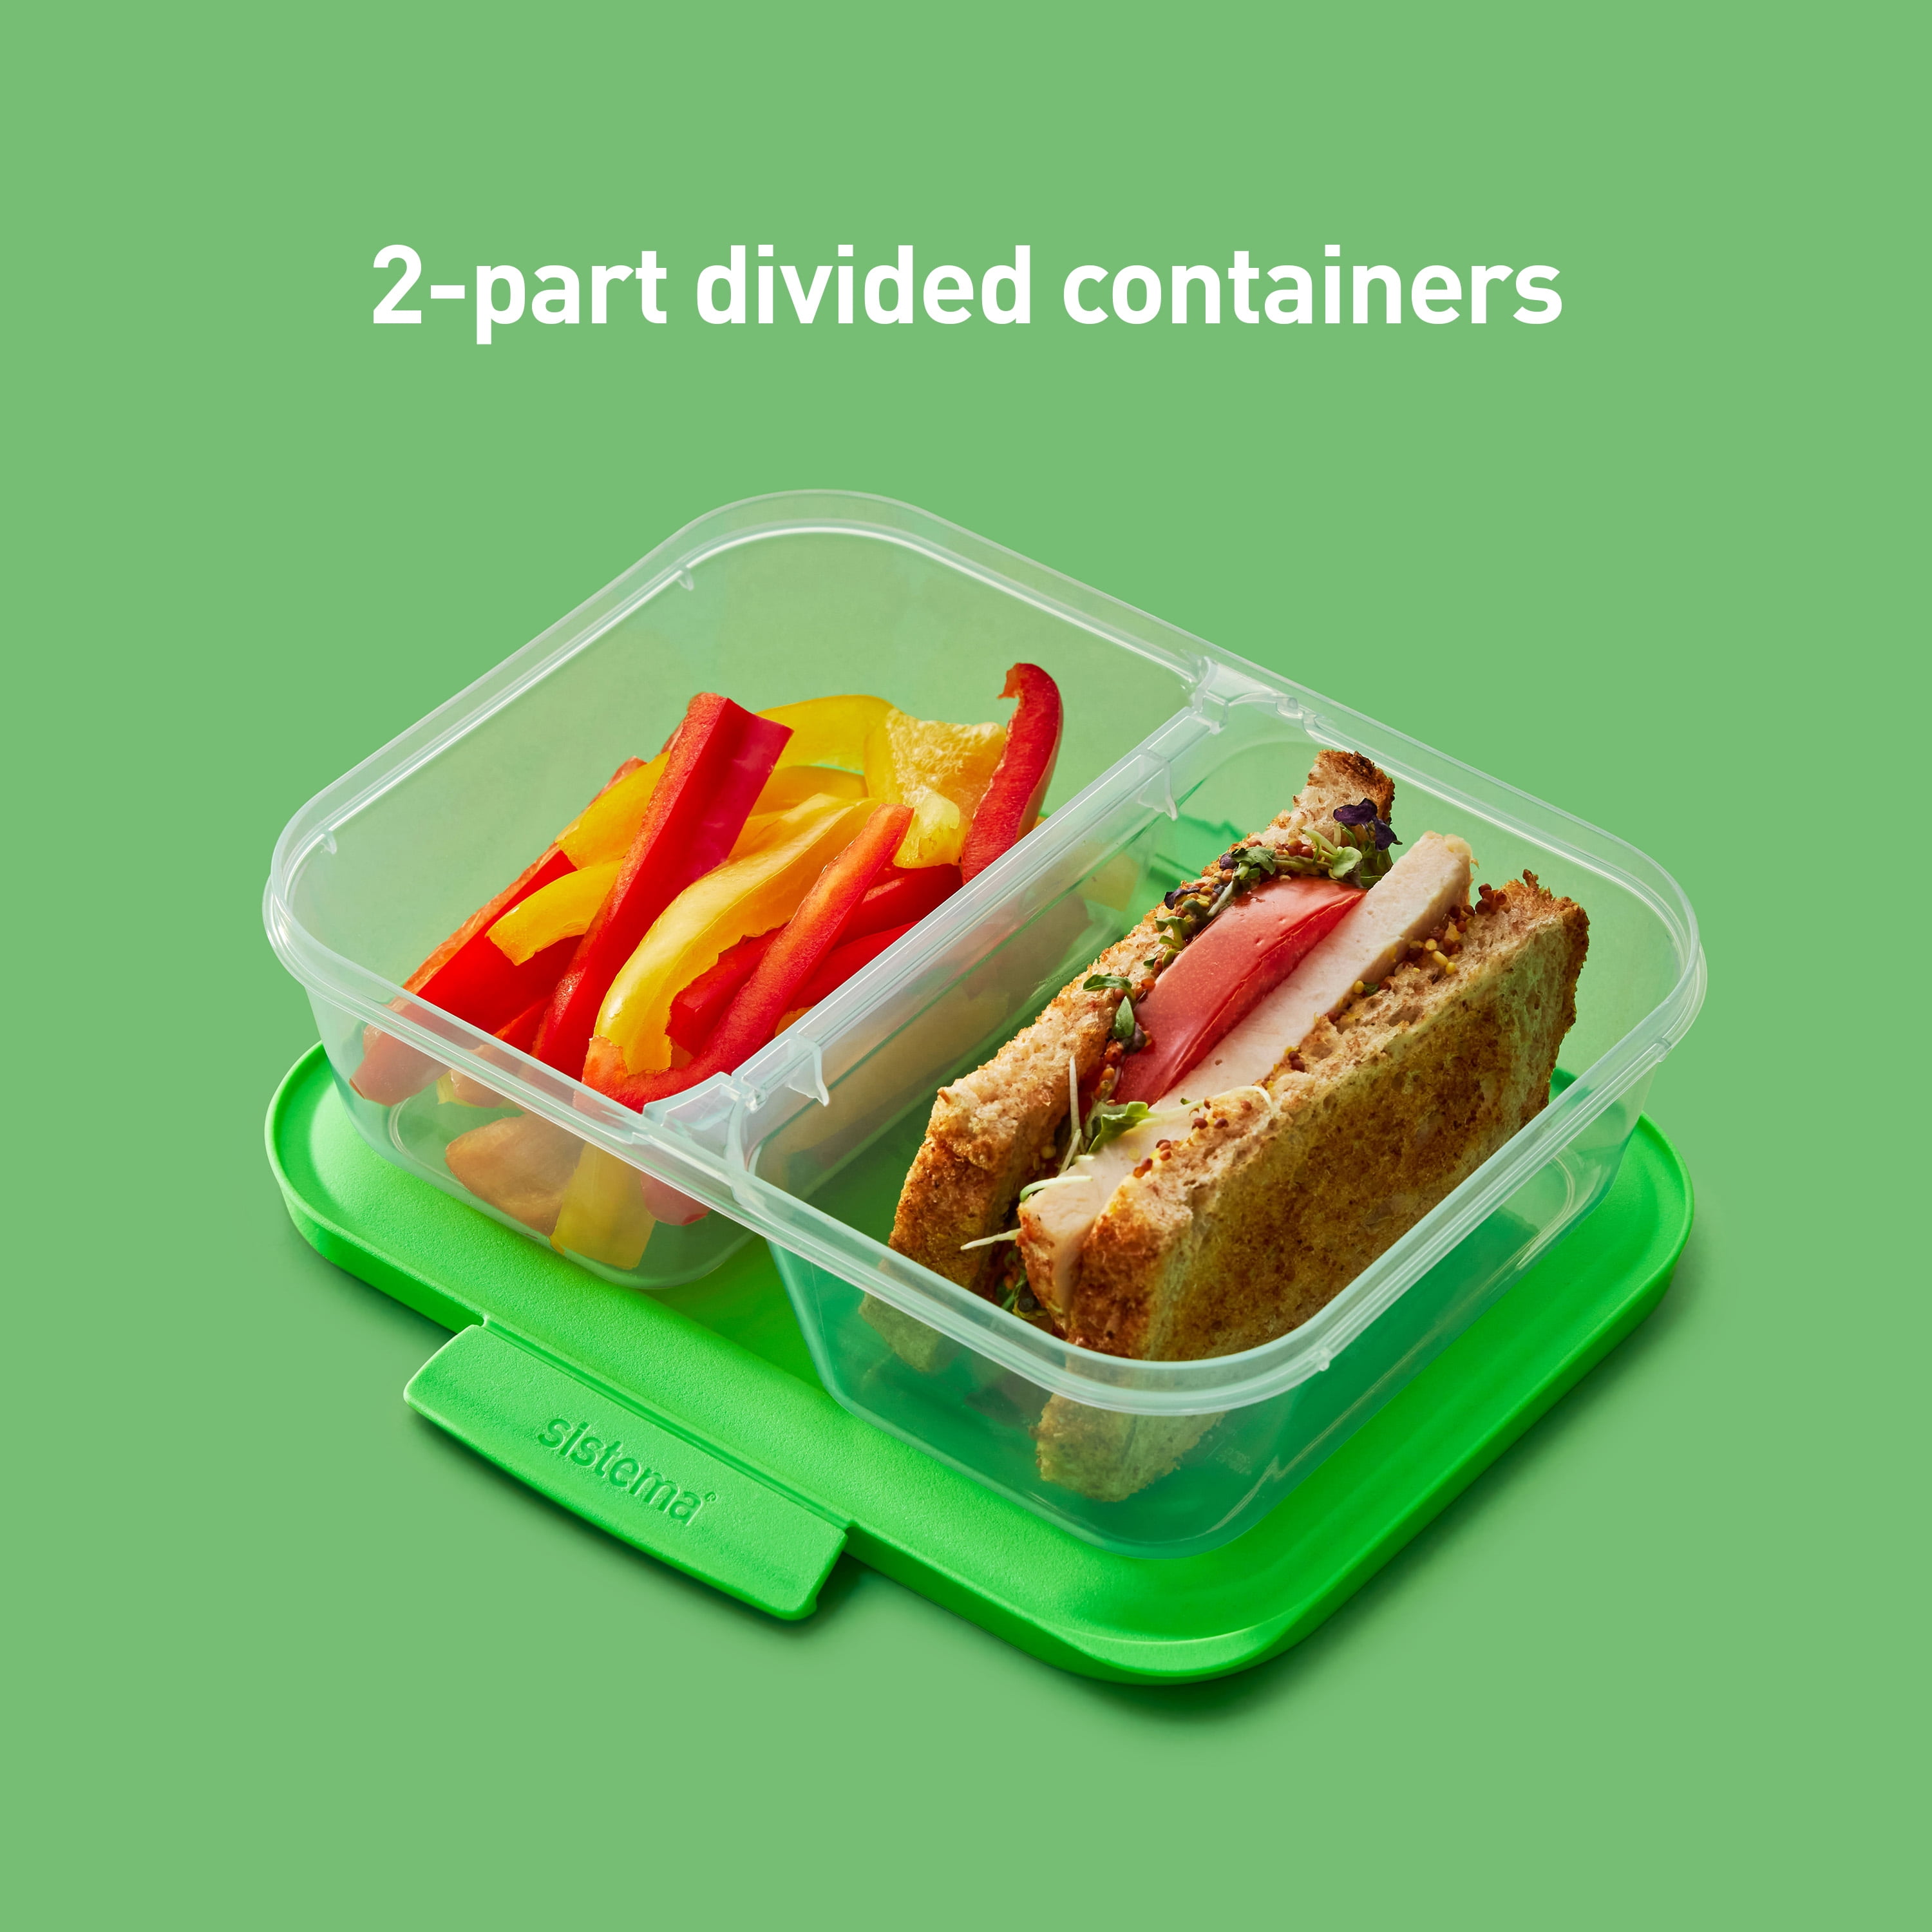 Sistema To Go Collection Snack 'N' Nest Food Storage Container, Color  Received May Vary, Set of 3, 150 ml, 305 ml, 520 ml